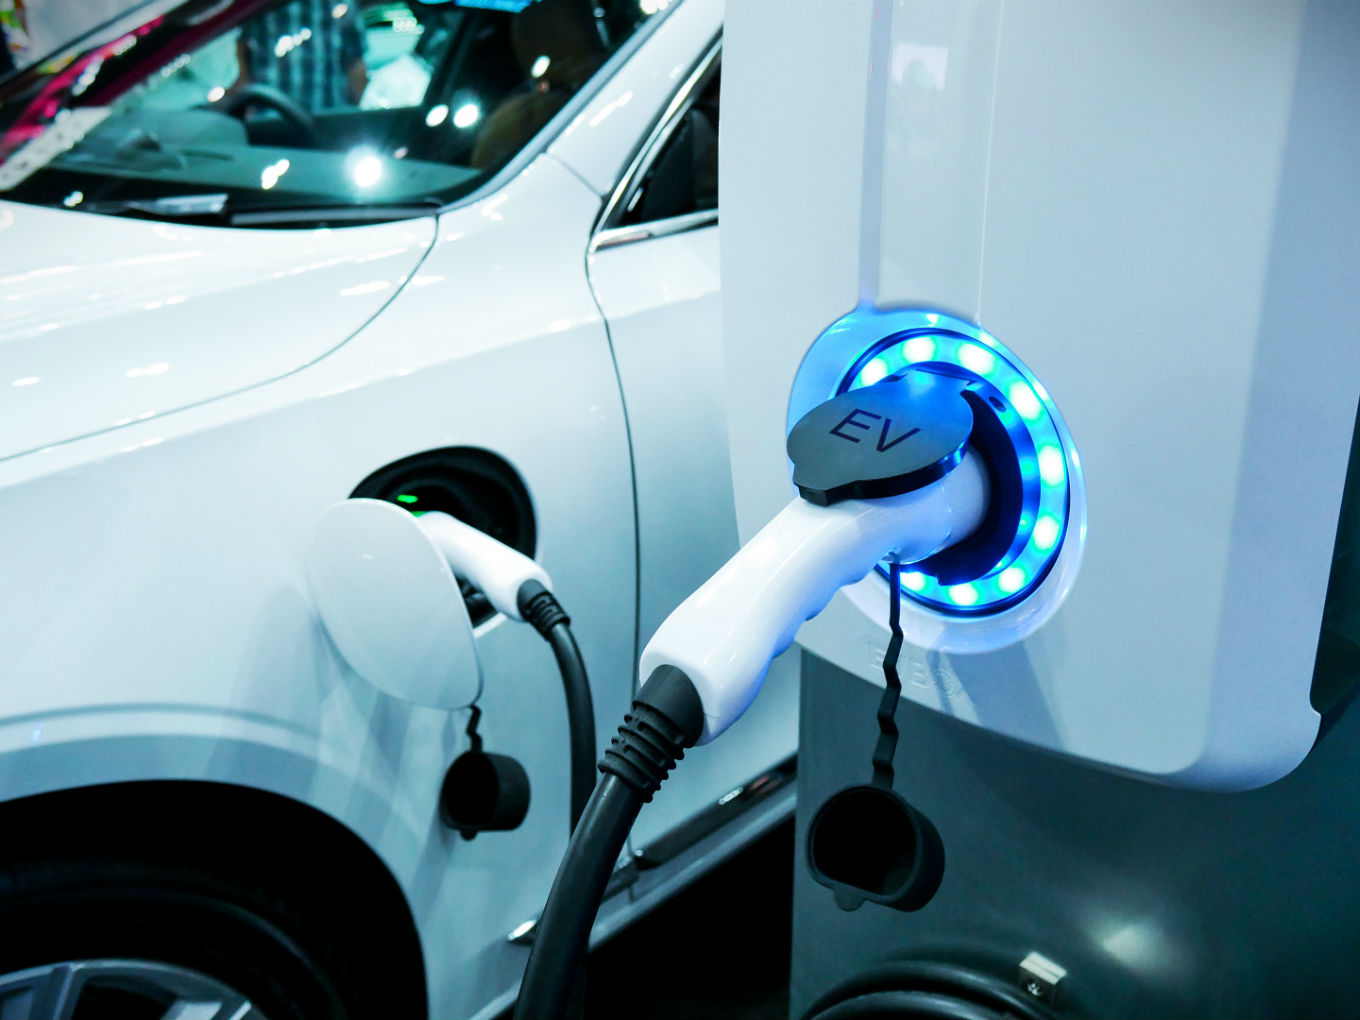 Ev Motors India To Set Up 6 500 Charging Stations In 5 Years,Tabletop Charging Station